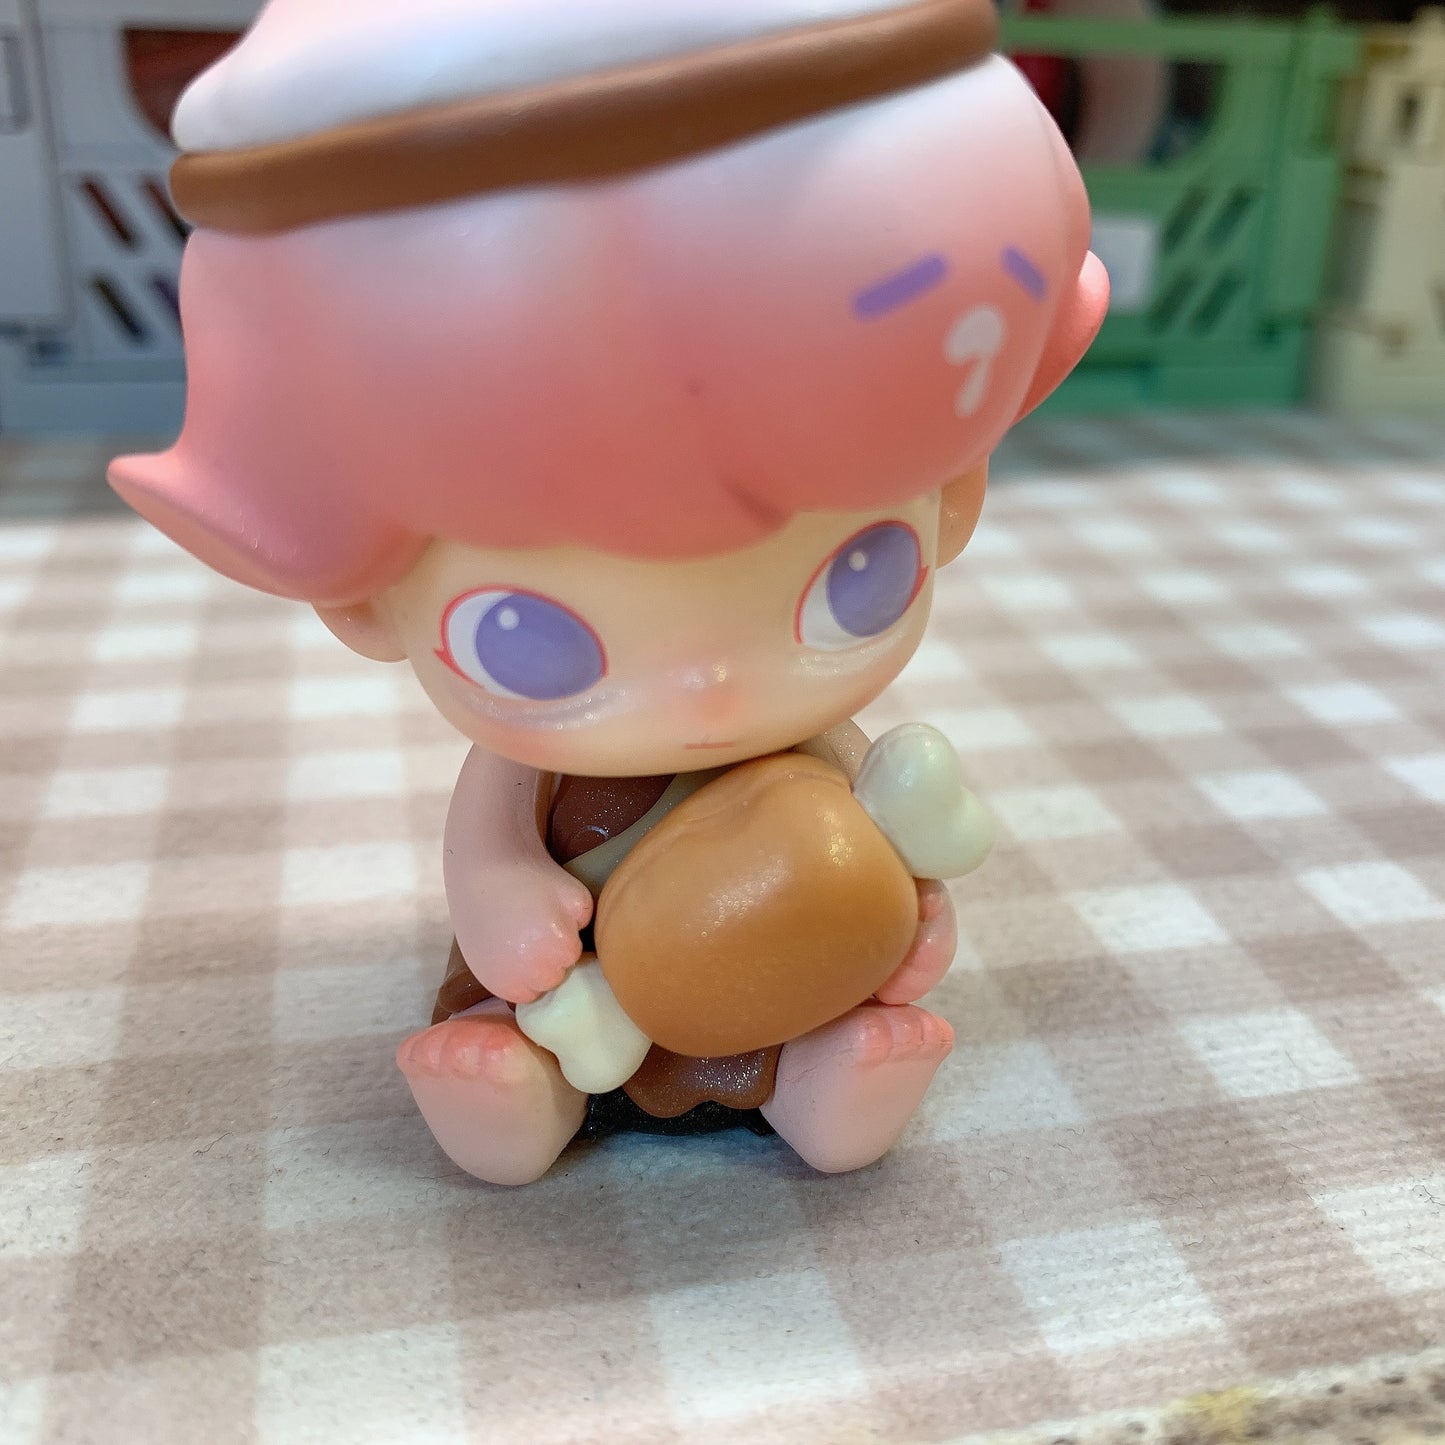 【PRELOVED and SALE 】POPMART Dimoo blind box toy Forest Night series Wild Man